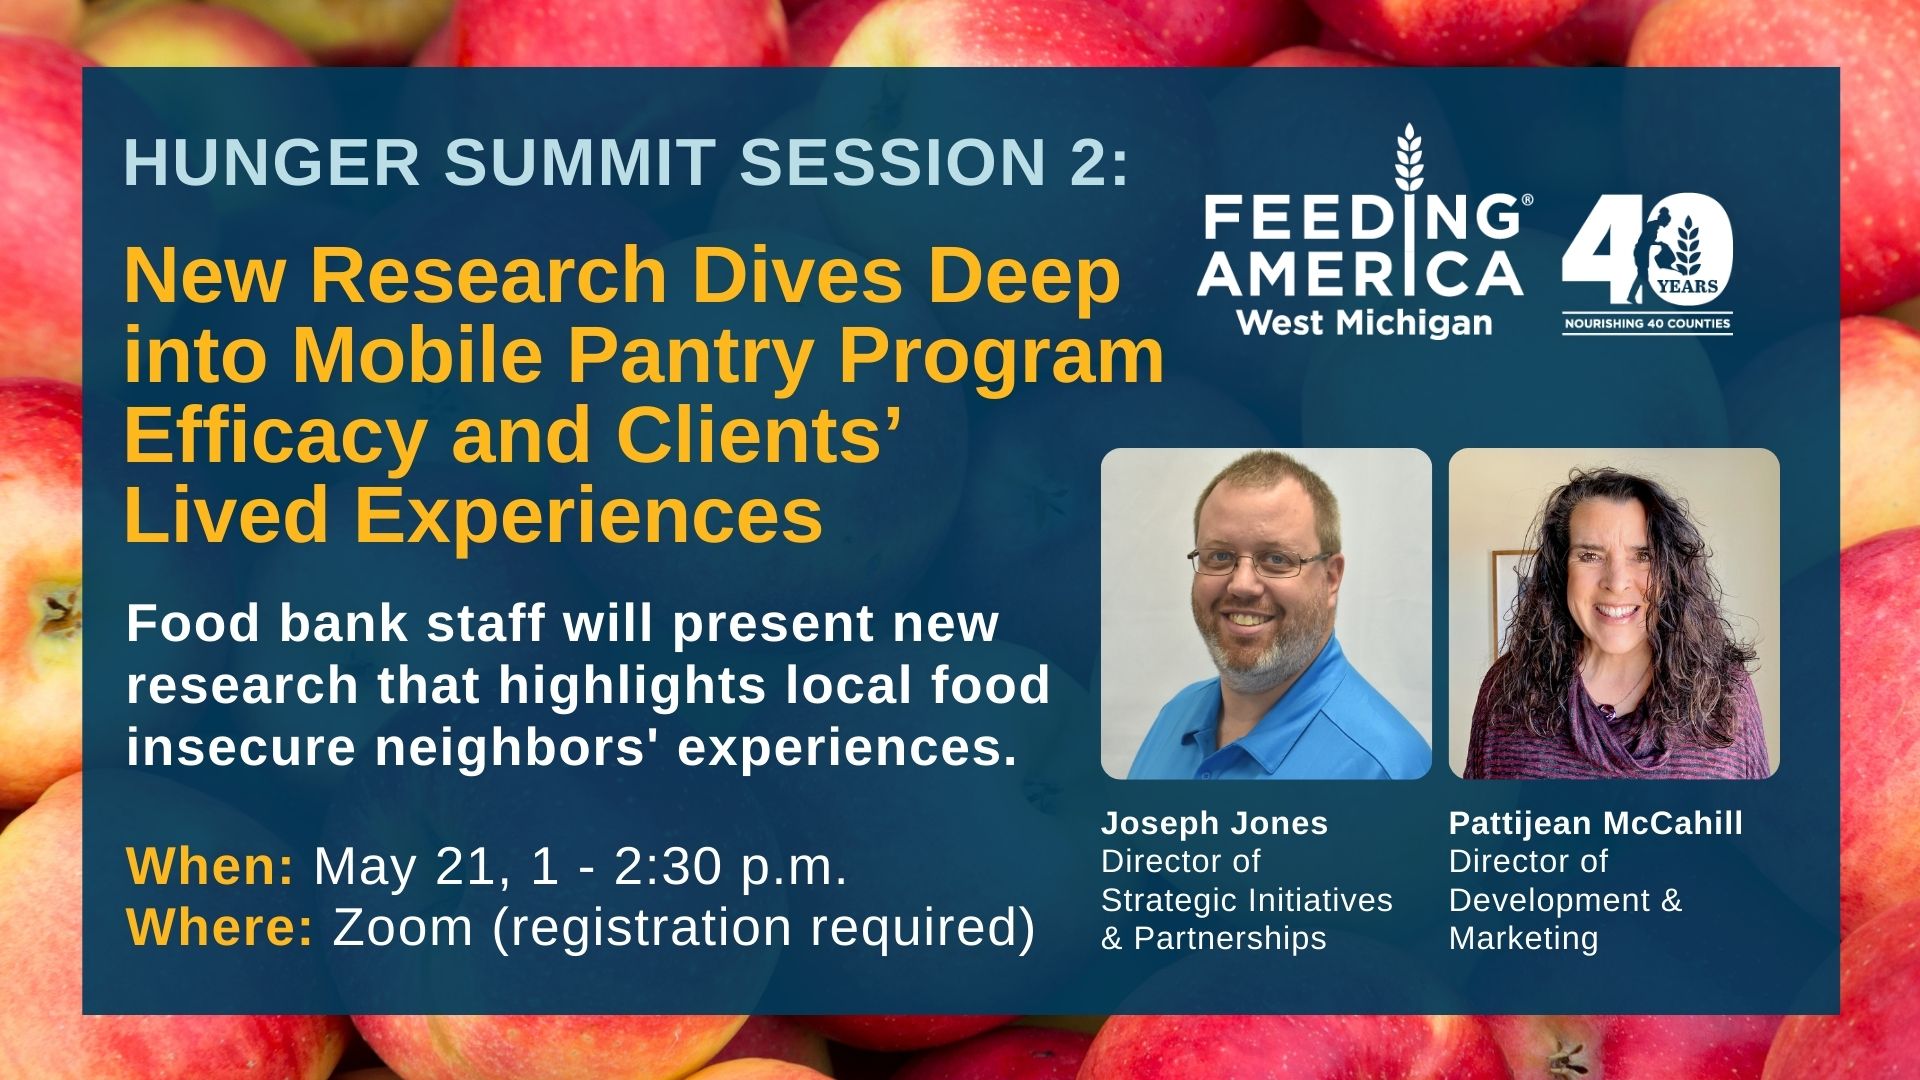 Hunger Summit Session 2 - New research dives deep into mobile pantry program efficacy and client's lived experiences - food bank staff will present new research that highlights local food insecure neighbors' experiences - May 21, 1-2:30 PM on Zoom (registration required)